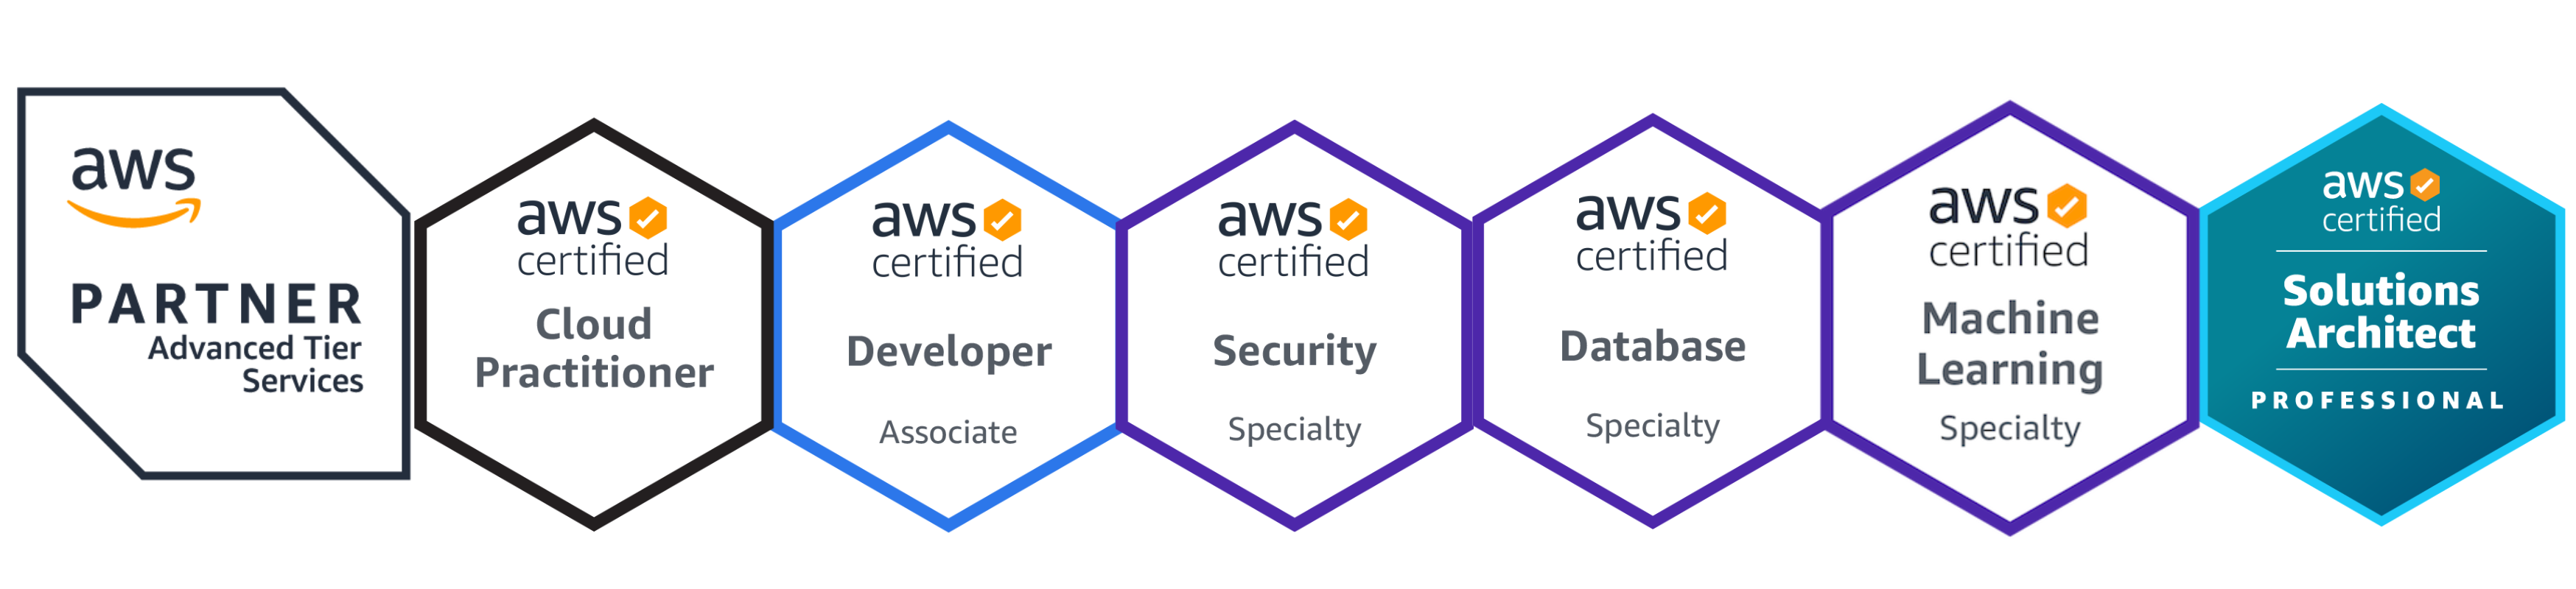 aws certification2